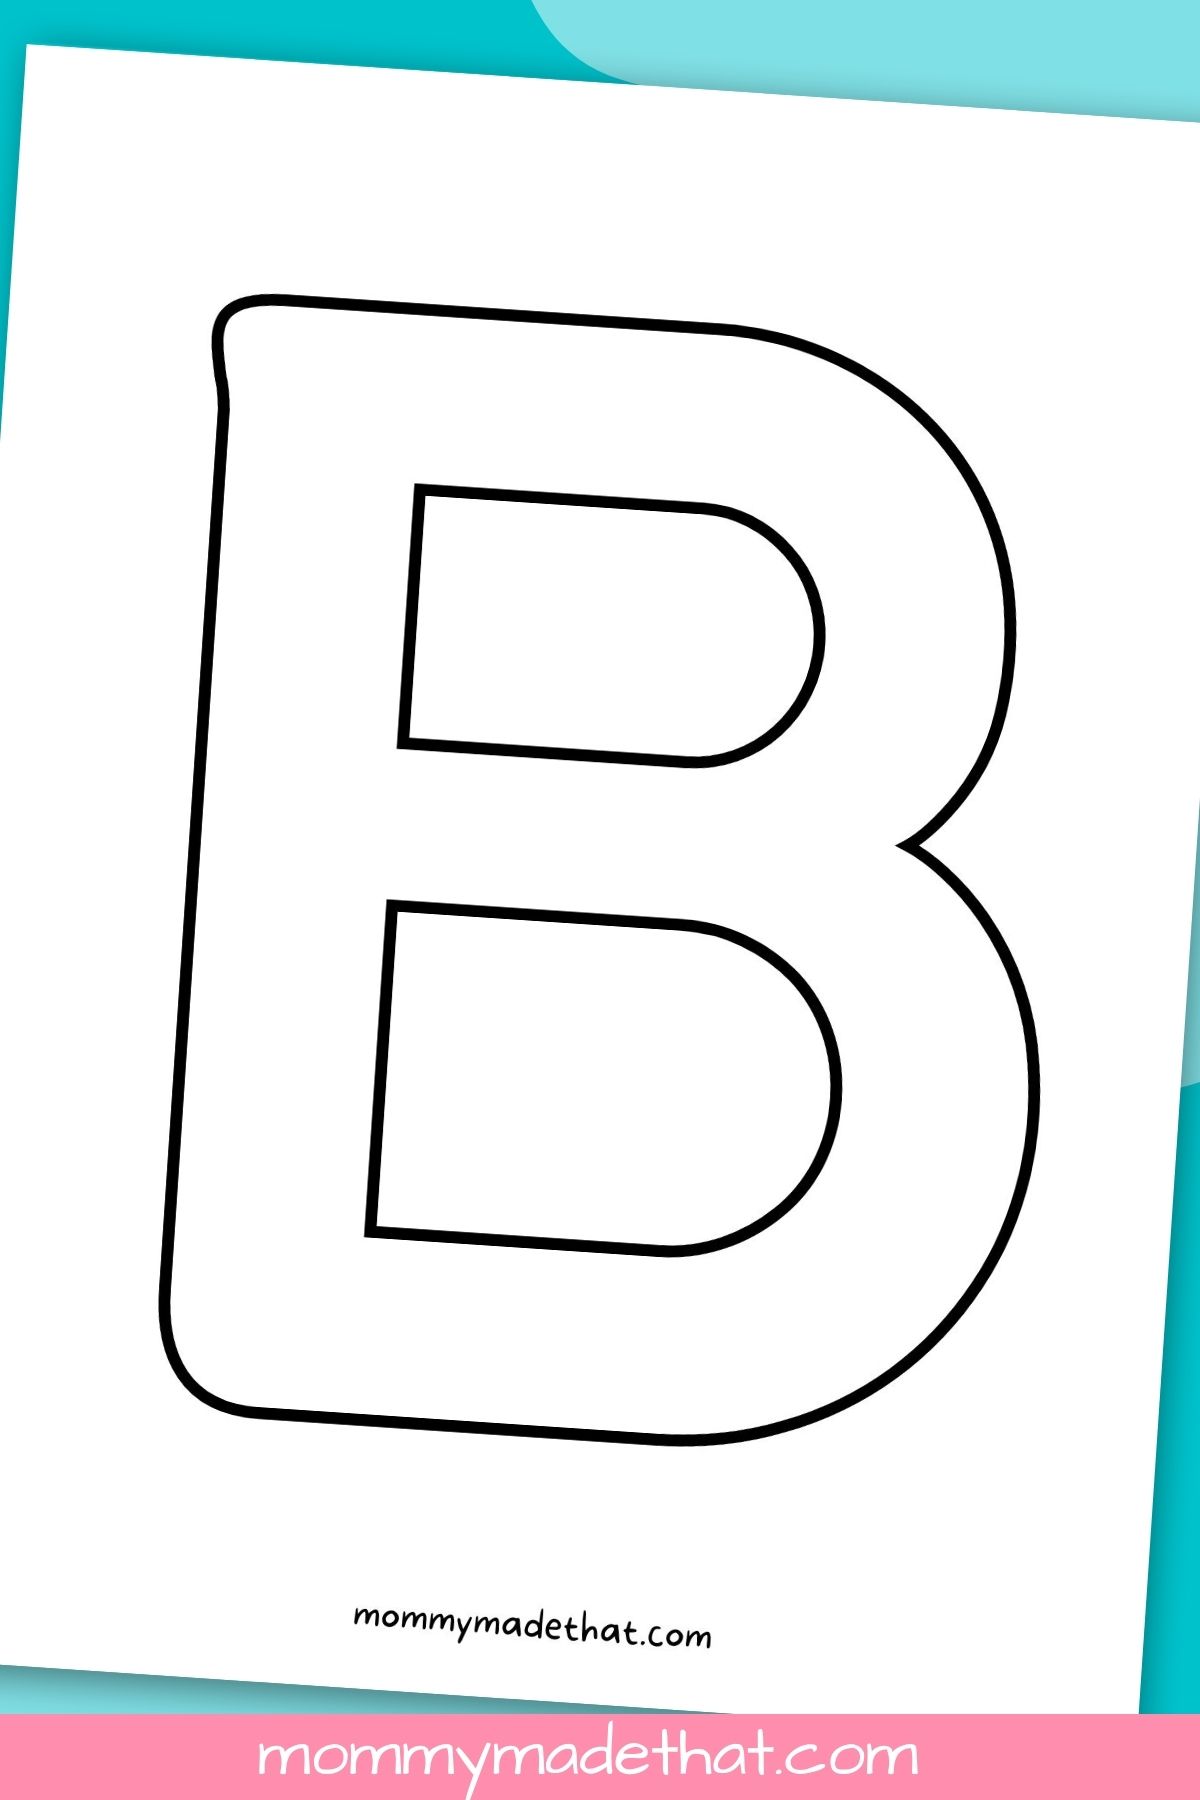 Printable letter b free template